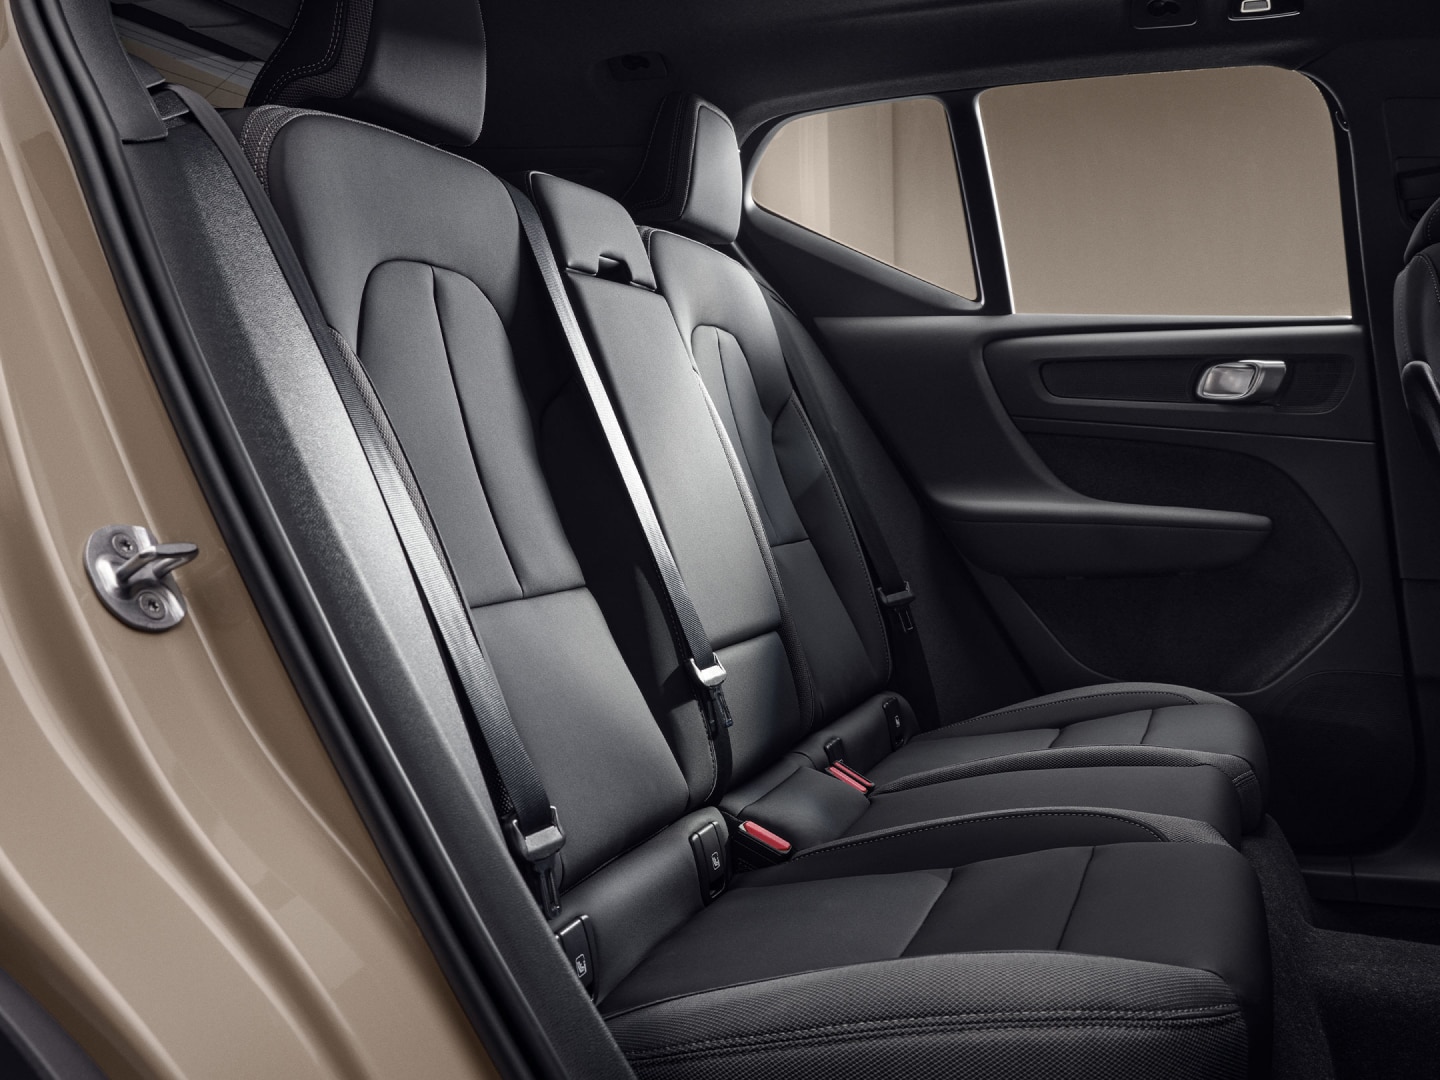 The rear seats of the fully electric Volvo EX40.